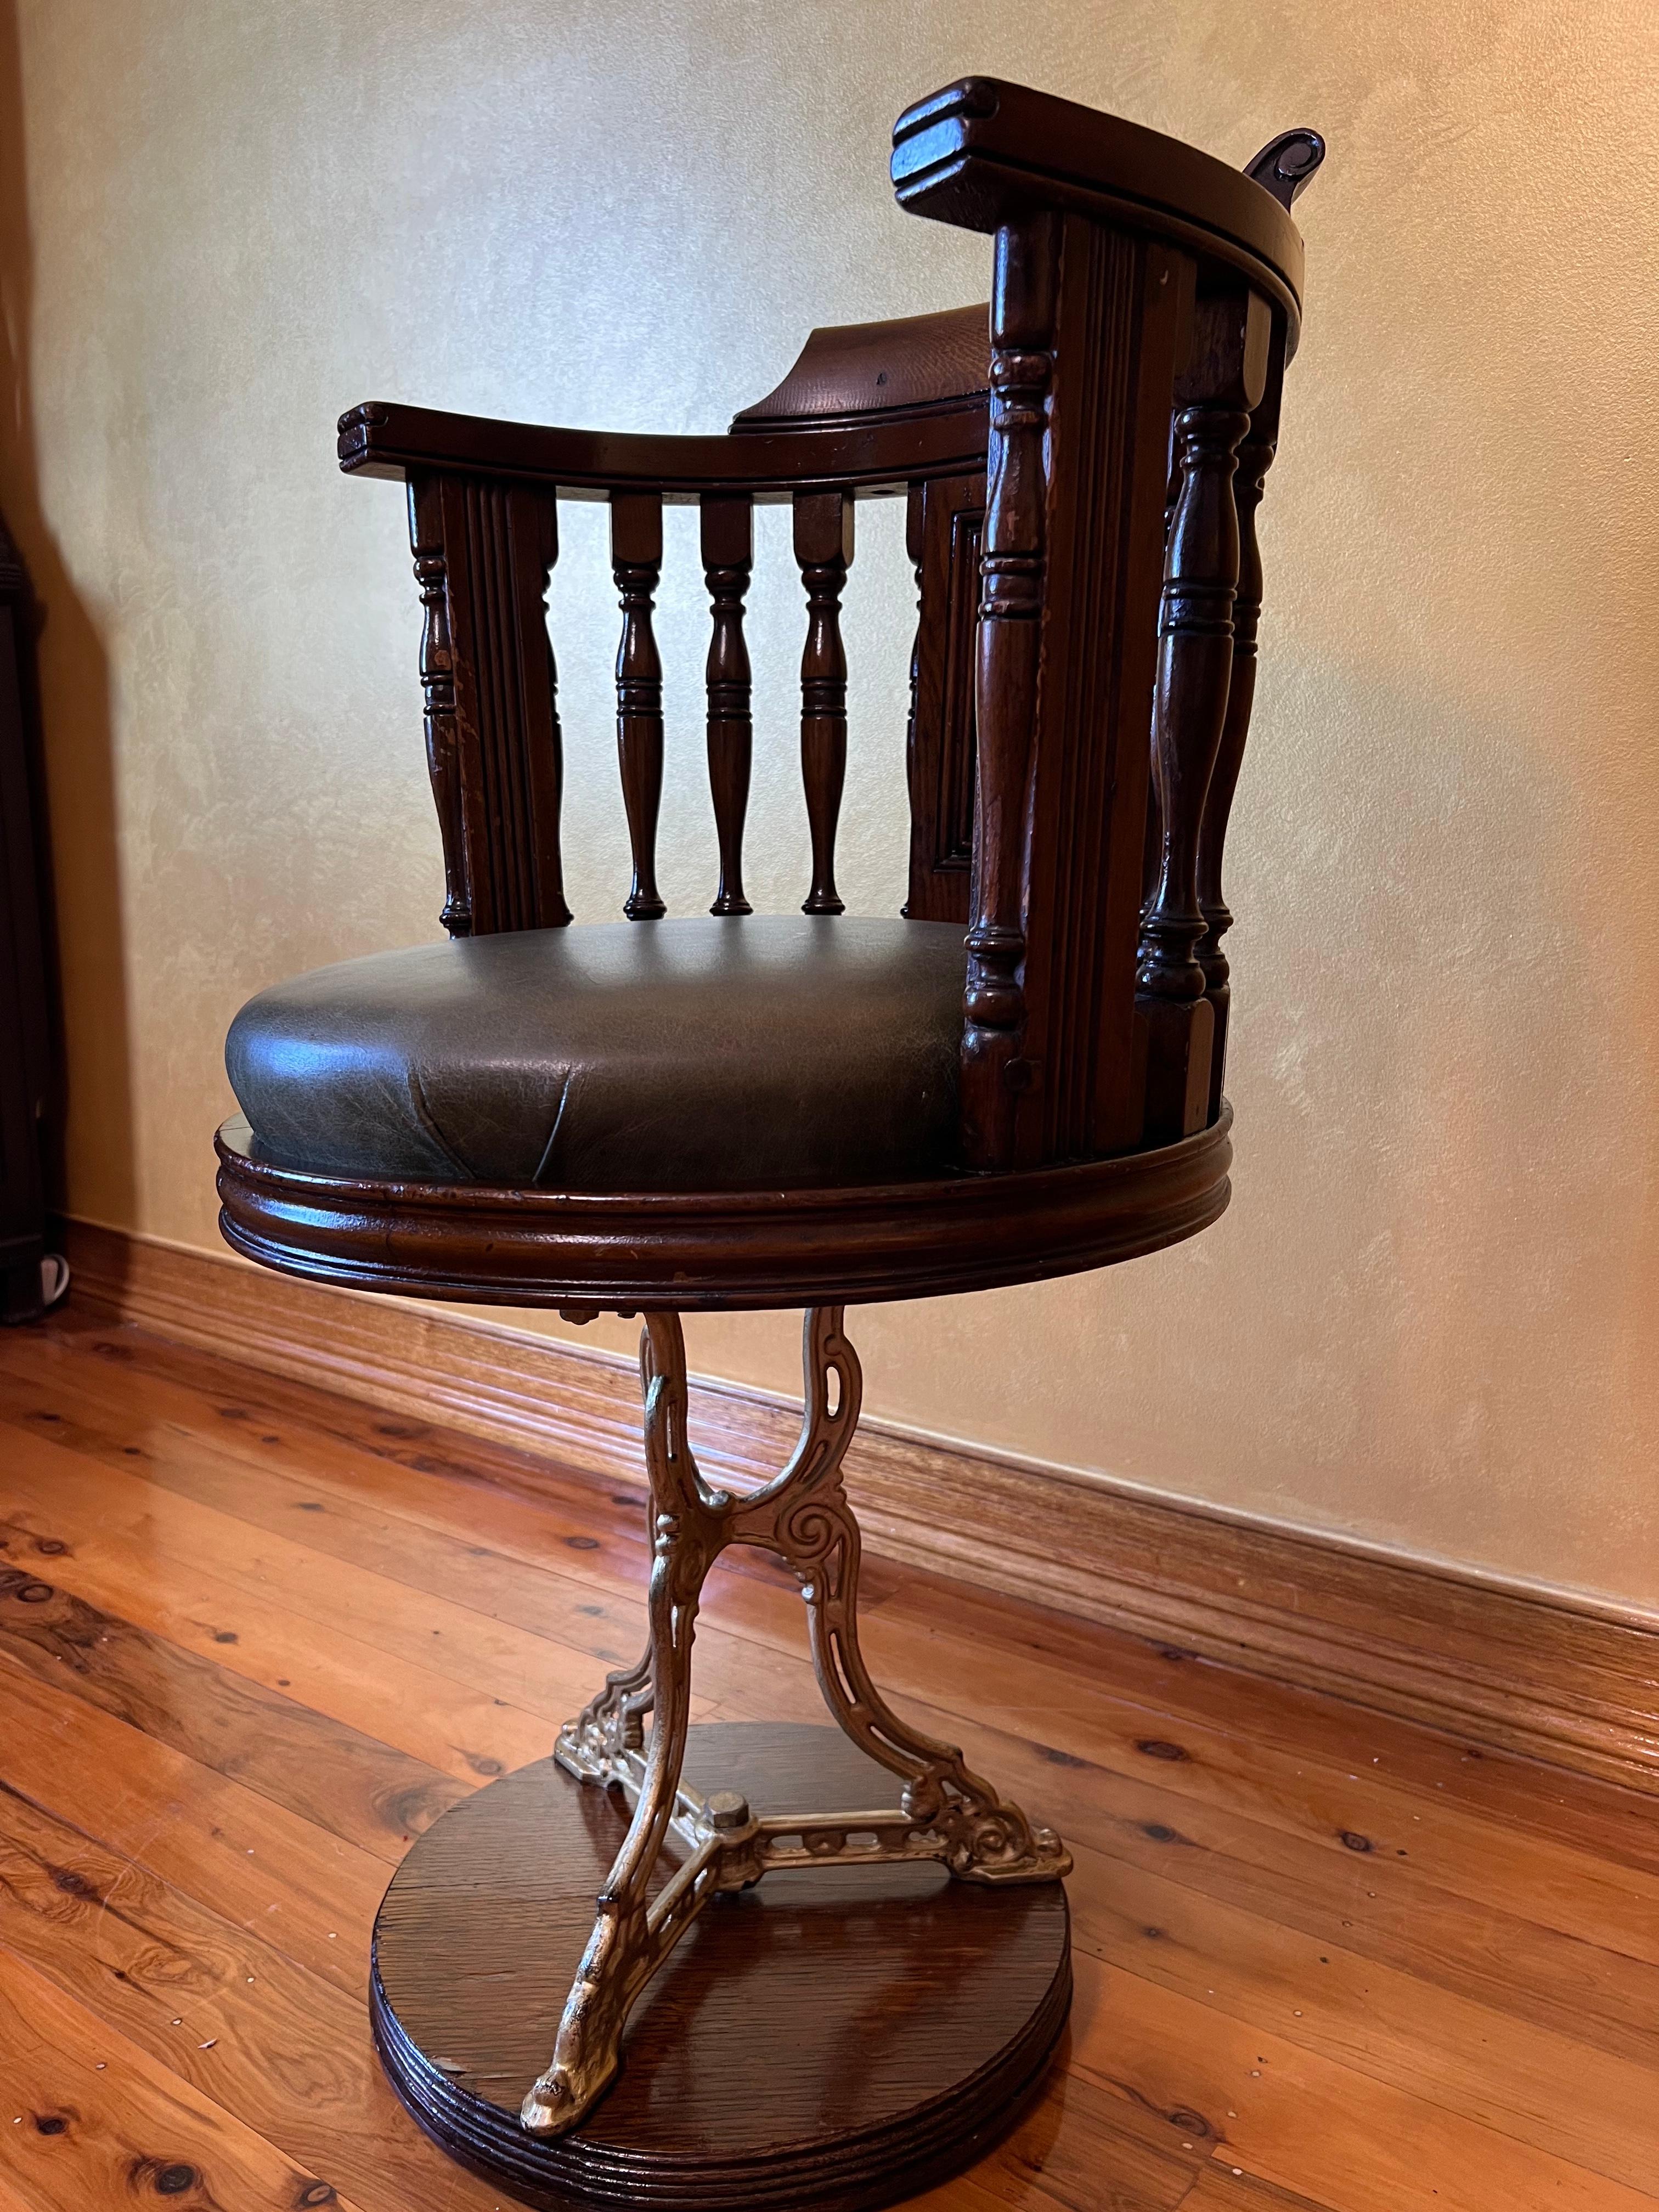 Padded green leather seat, HP engraved in back rest of chair, solid oak, tuned spindles, swivels, brass legs, once mounted to the floor of a grand vessel now free standing.

Circa: 1850

Material: Oak & leather

Country of Origin: